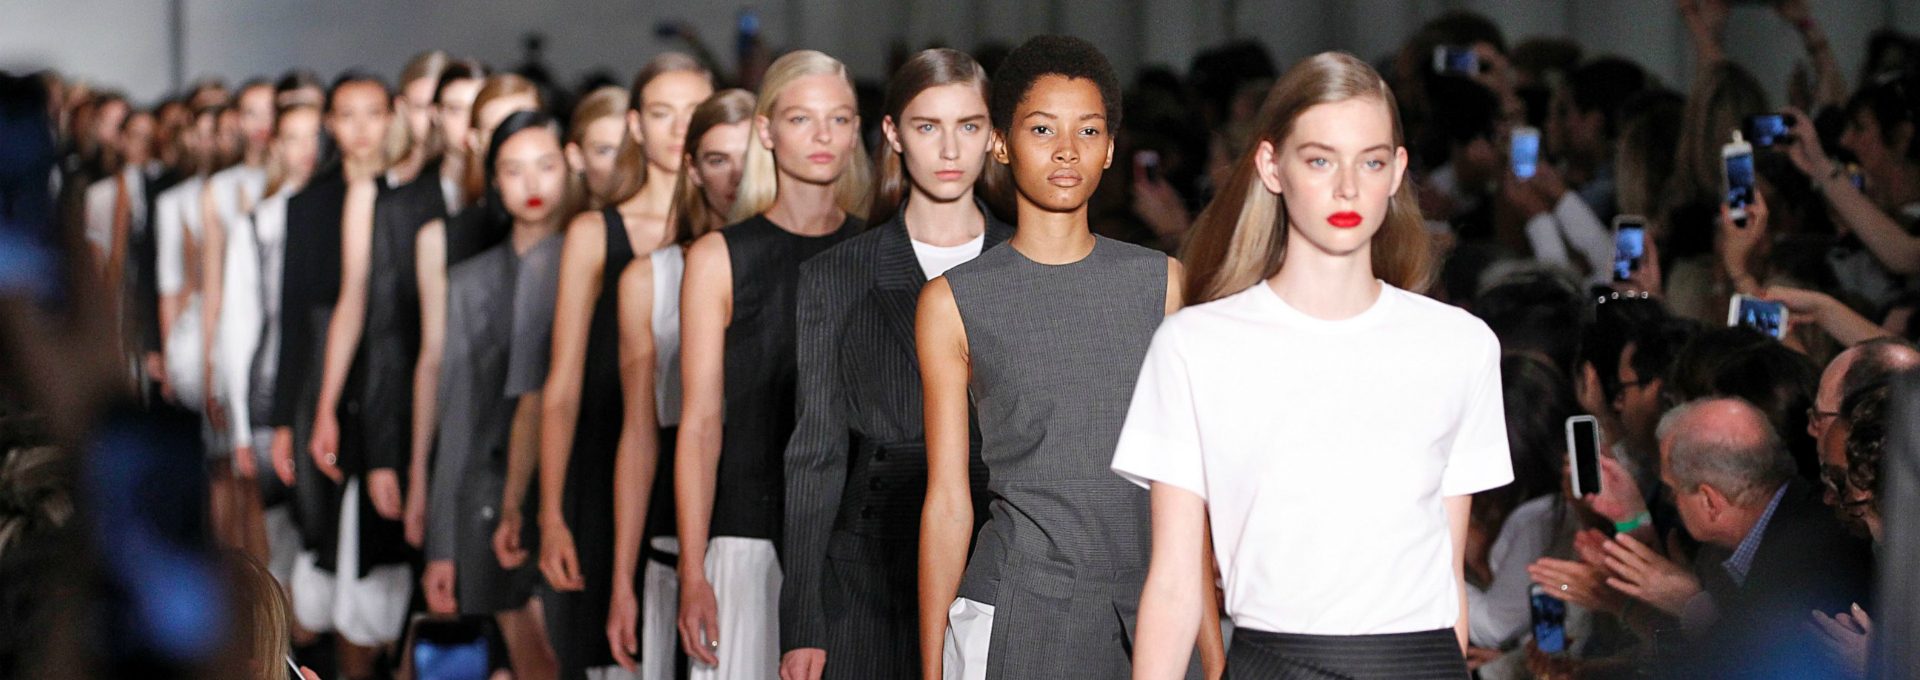 Photos: How New York Fashion Week Has Changed Throughout the Years